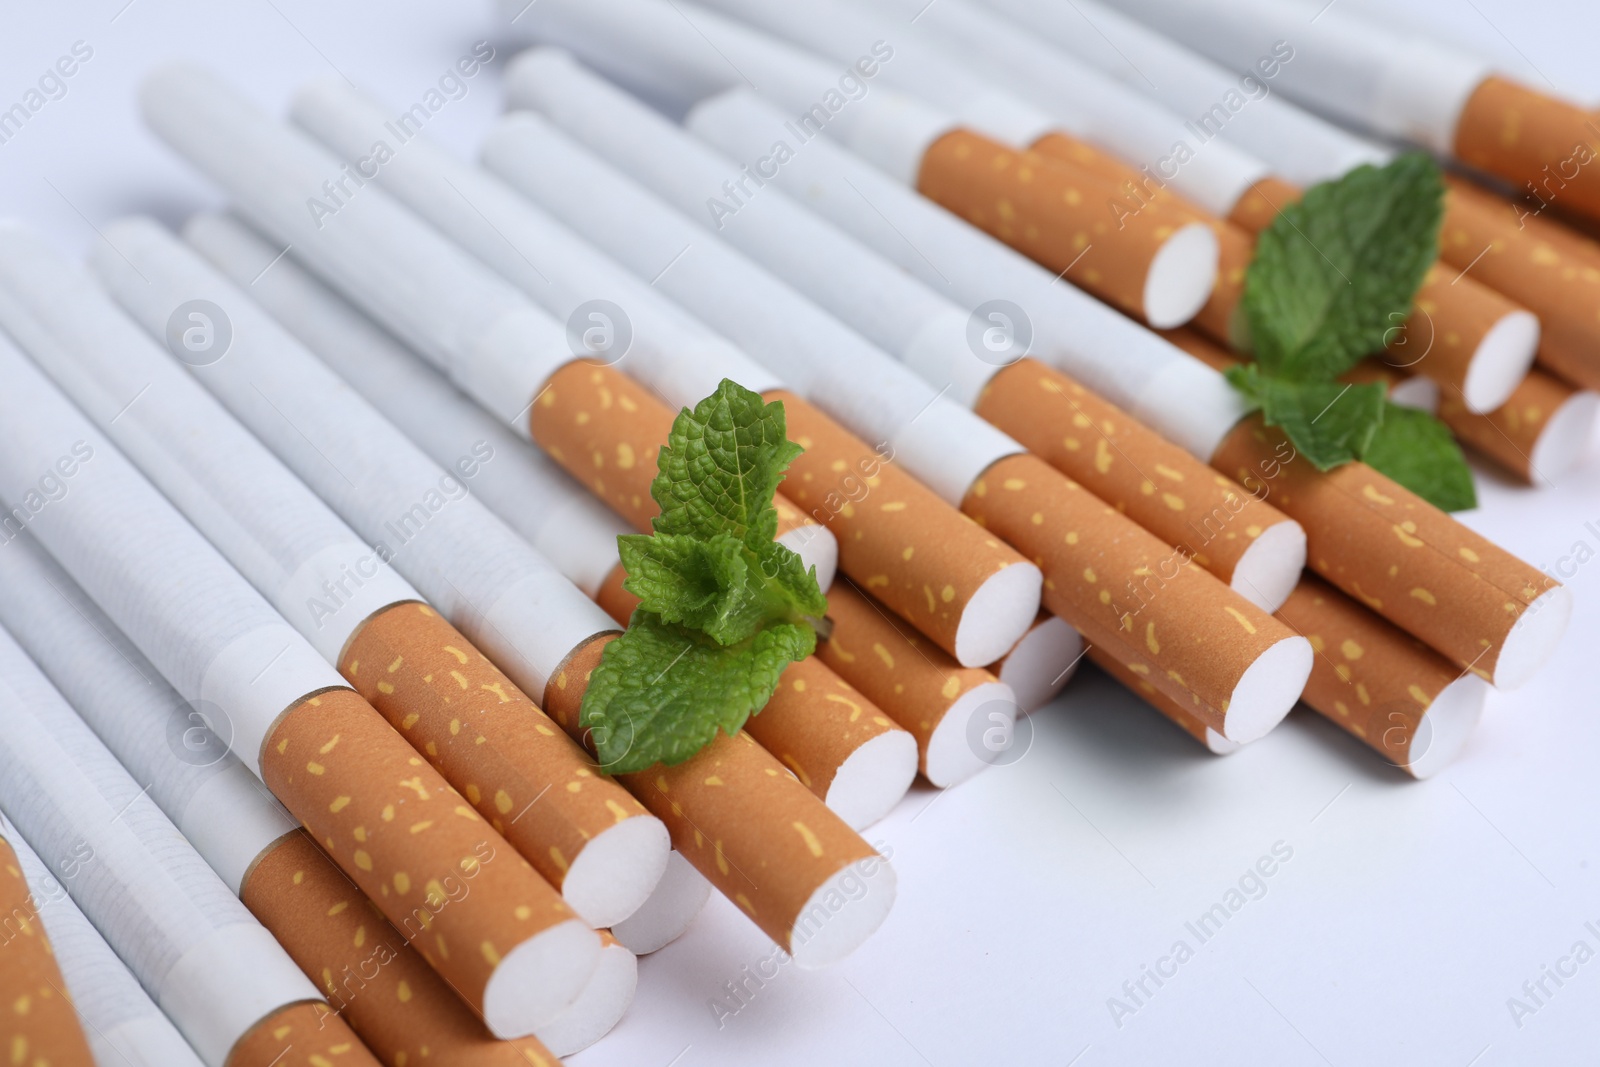 Photo of Menthol cigarettes and fresh mint leaves on white background, closeup